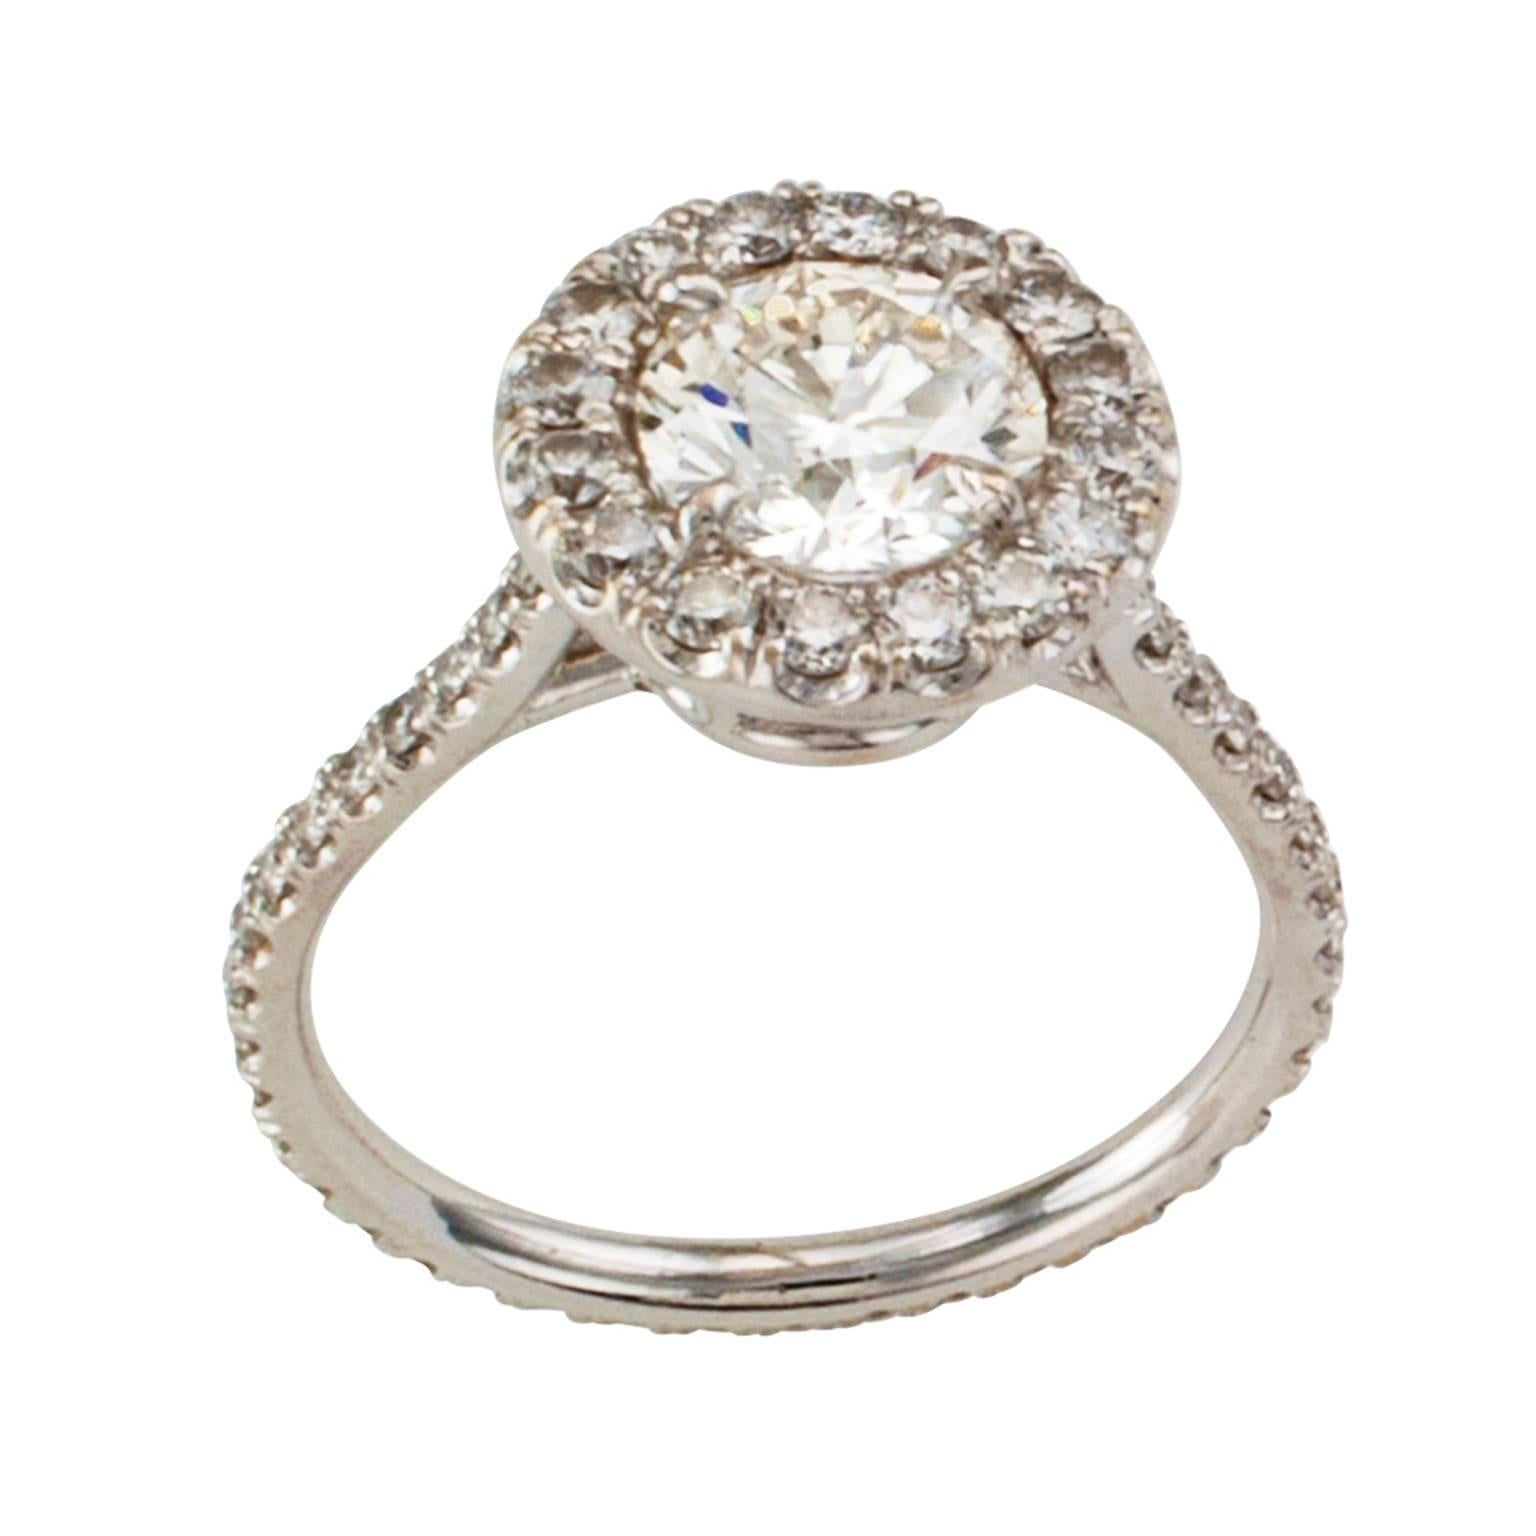 Estate Diamond Halo Engagement Ring

An exciting and more contemporary halo engagement ring beautifully crafted in 18 karat white gold featuring a round brilliant-cut diamond weighing approximately 1.20 carats, approximately J - K color and SI1